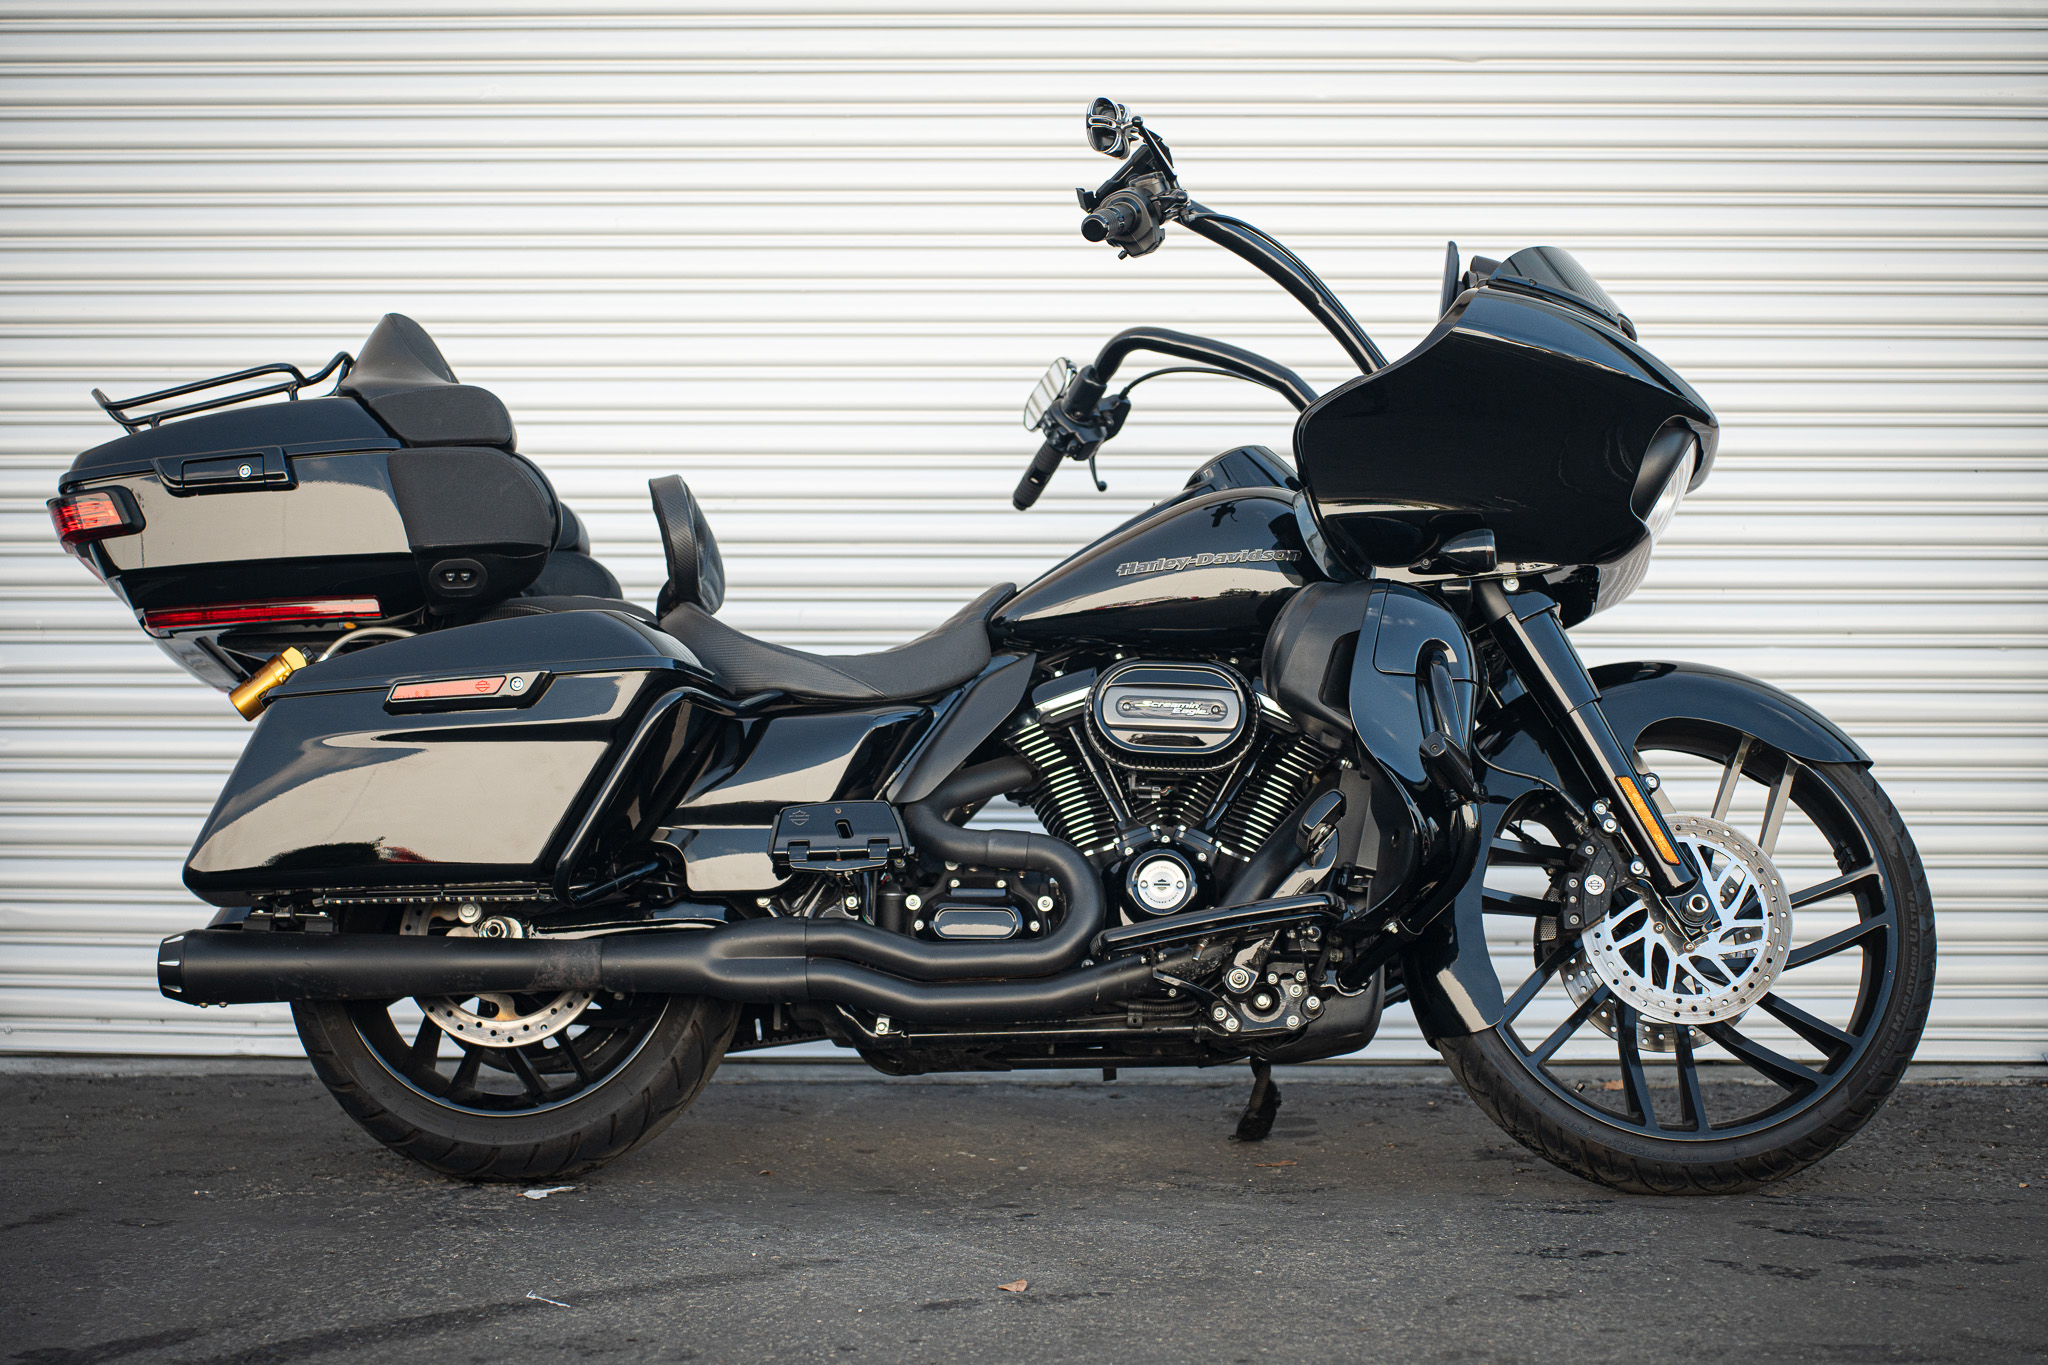 Harley Davidson sits on its kickstand in front of an industrial garage